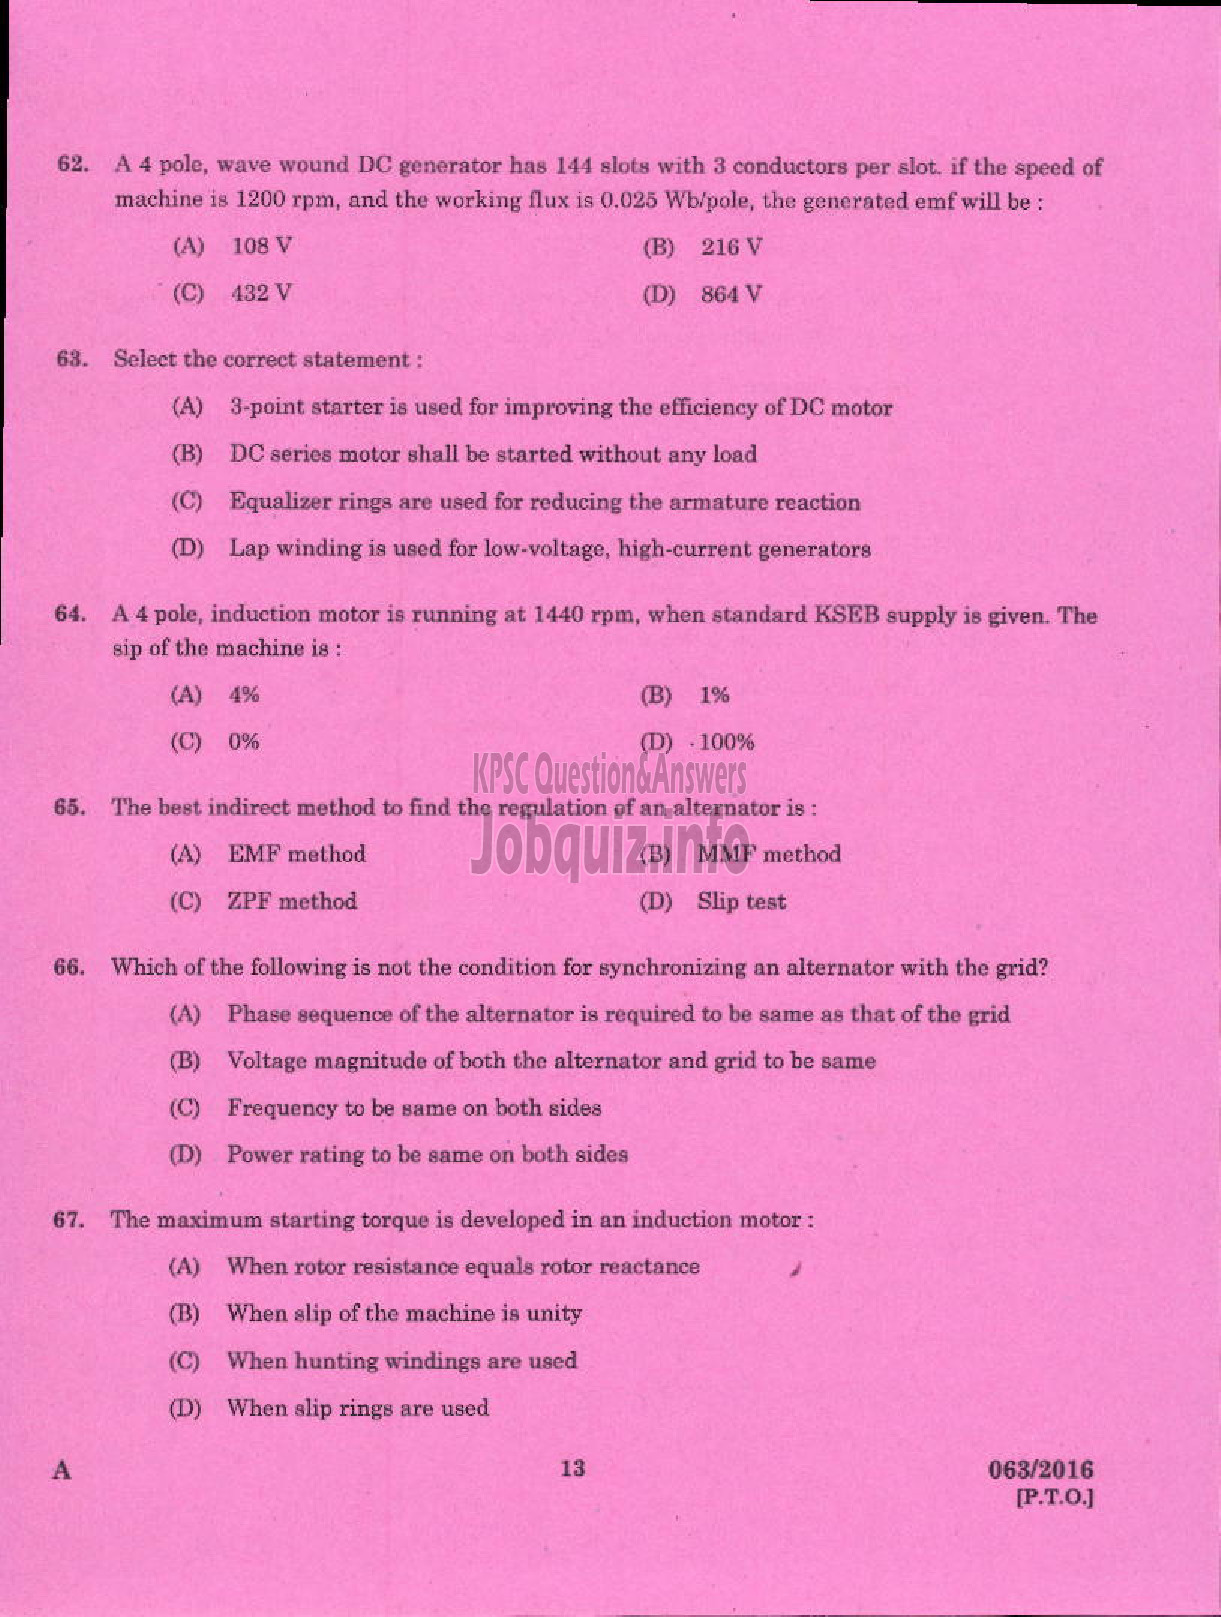 Kerala PSC Question Paper - ASSISTANT PROFESSOR IN ELECTRICAL AND ELECTRONICS ENGINEERING TECHNICAL EDUCATION ENGINEERING COLLEGES-11